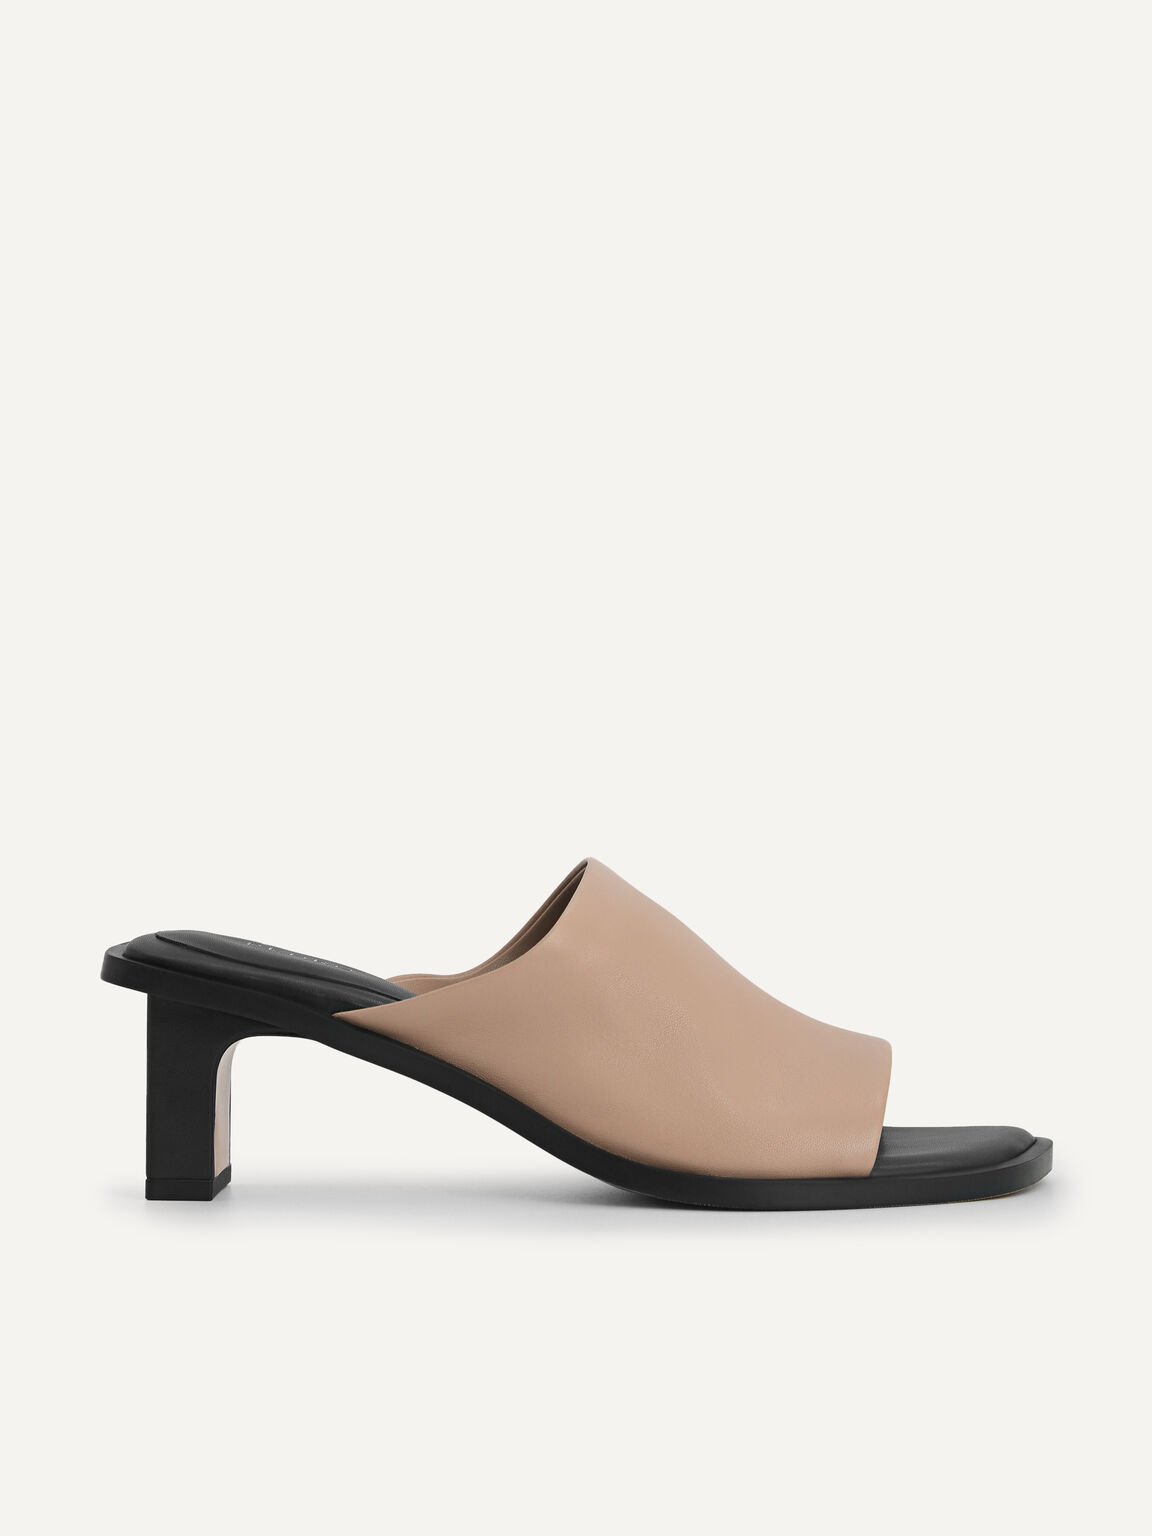 Leather Heeled Mules, Taupe, hi-res